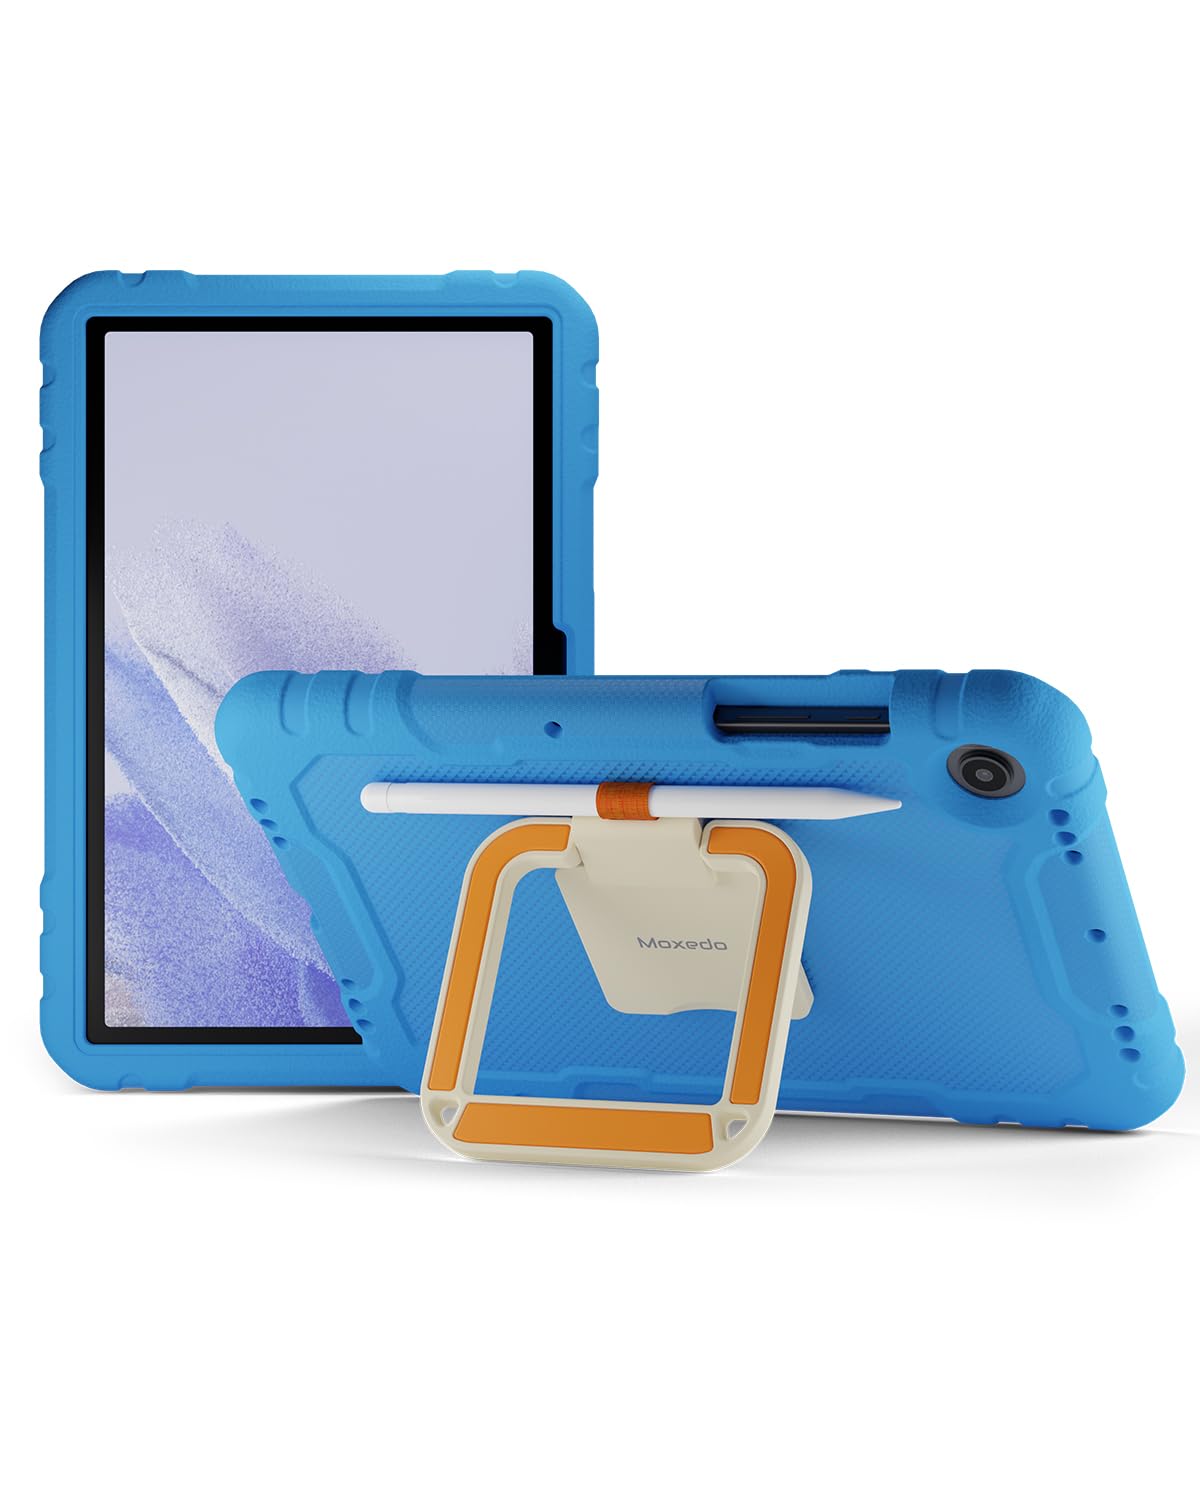 Moxedo Rugged Protective EVA Foam Silicone Kids Case Cover, Shockproof Foldable 360 Rotatable Stand Handle Grip with Pencil Holder  for Samsung Galaxy Tab A8 Case 10.5-inch